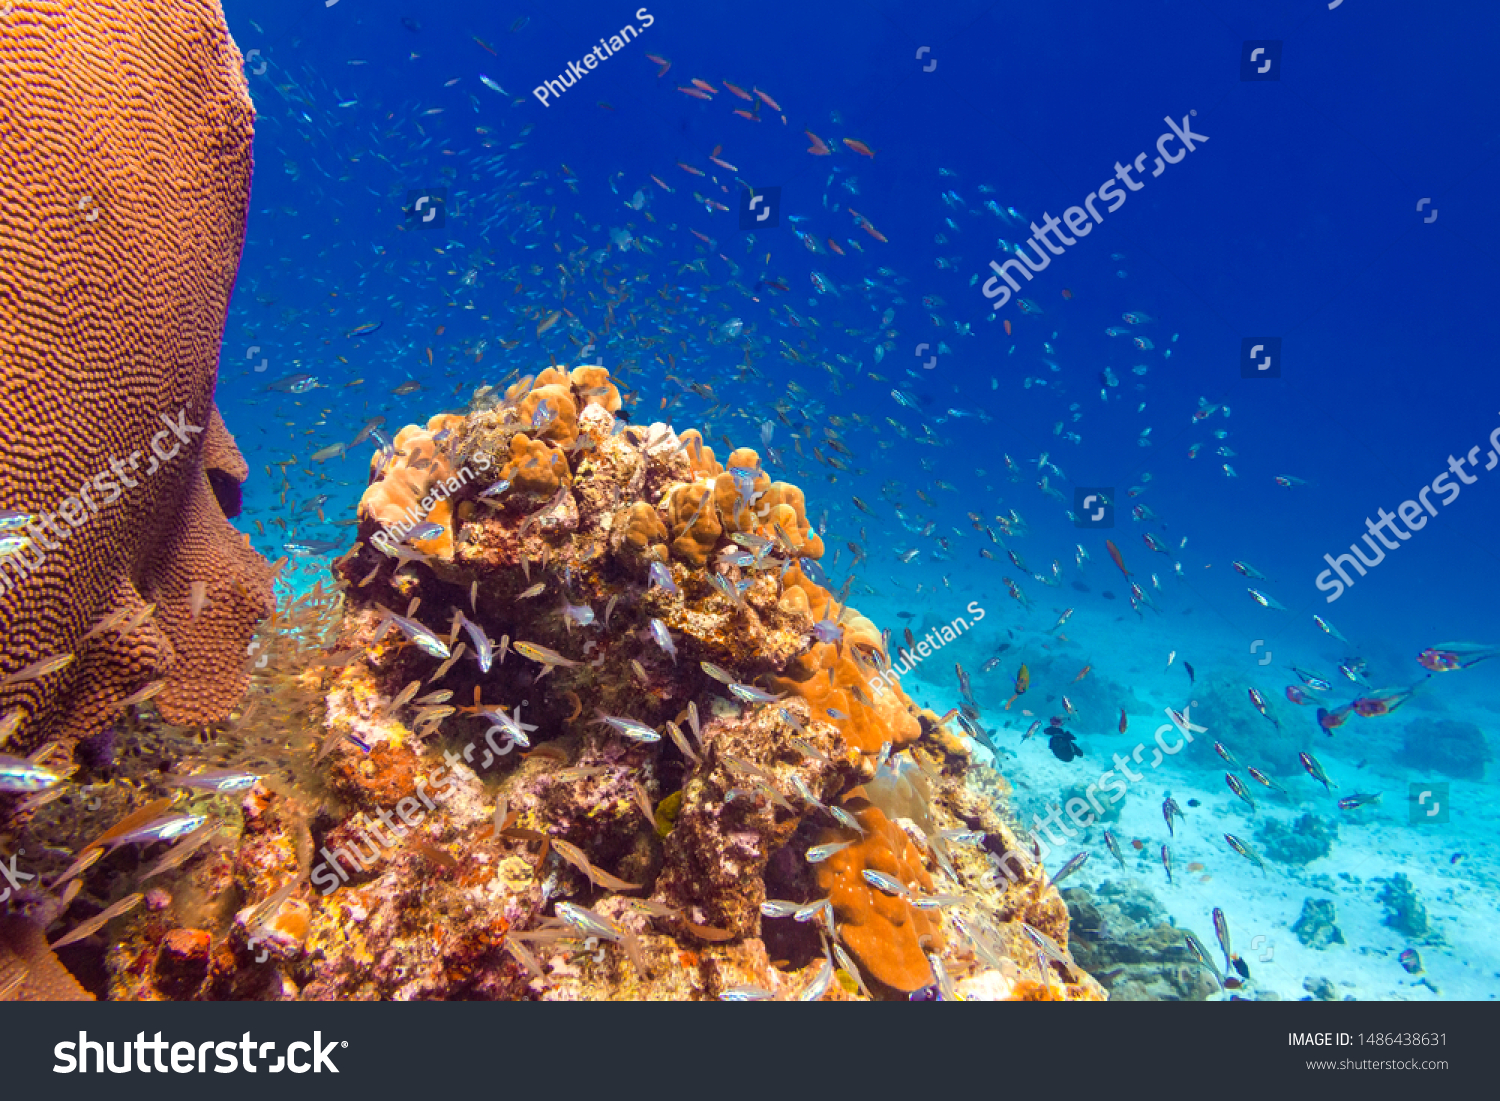 Coral reefs, schools of fish. One of the most famous and beautiful world places for diving and snorkel. Underwater world of Surin and Similan Islands. Andaman Sea on the border of Thailand and Myanmar #1486438631